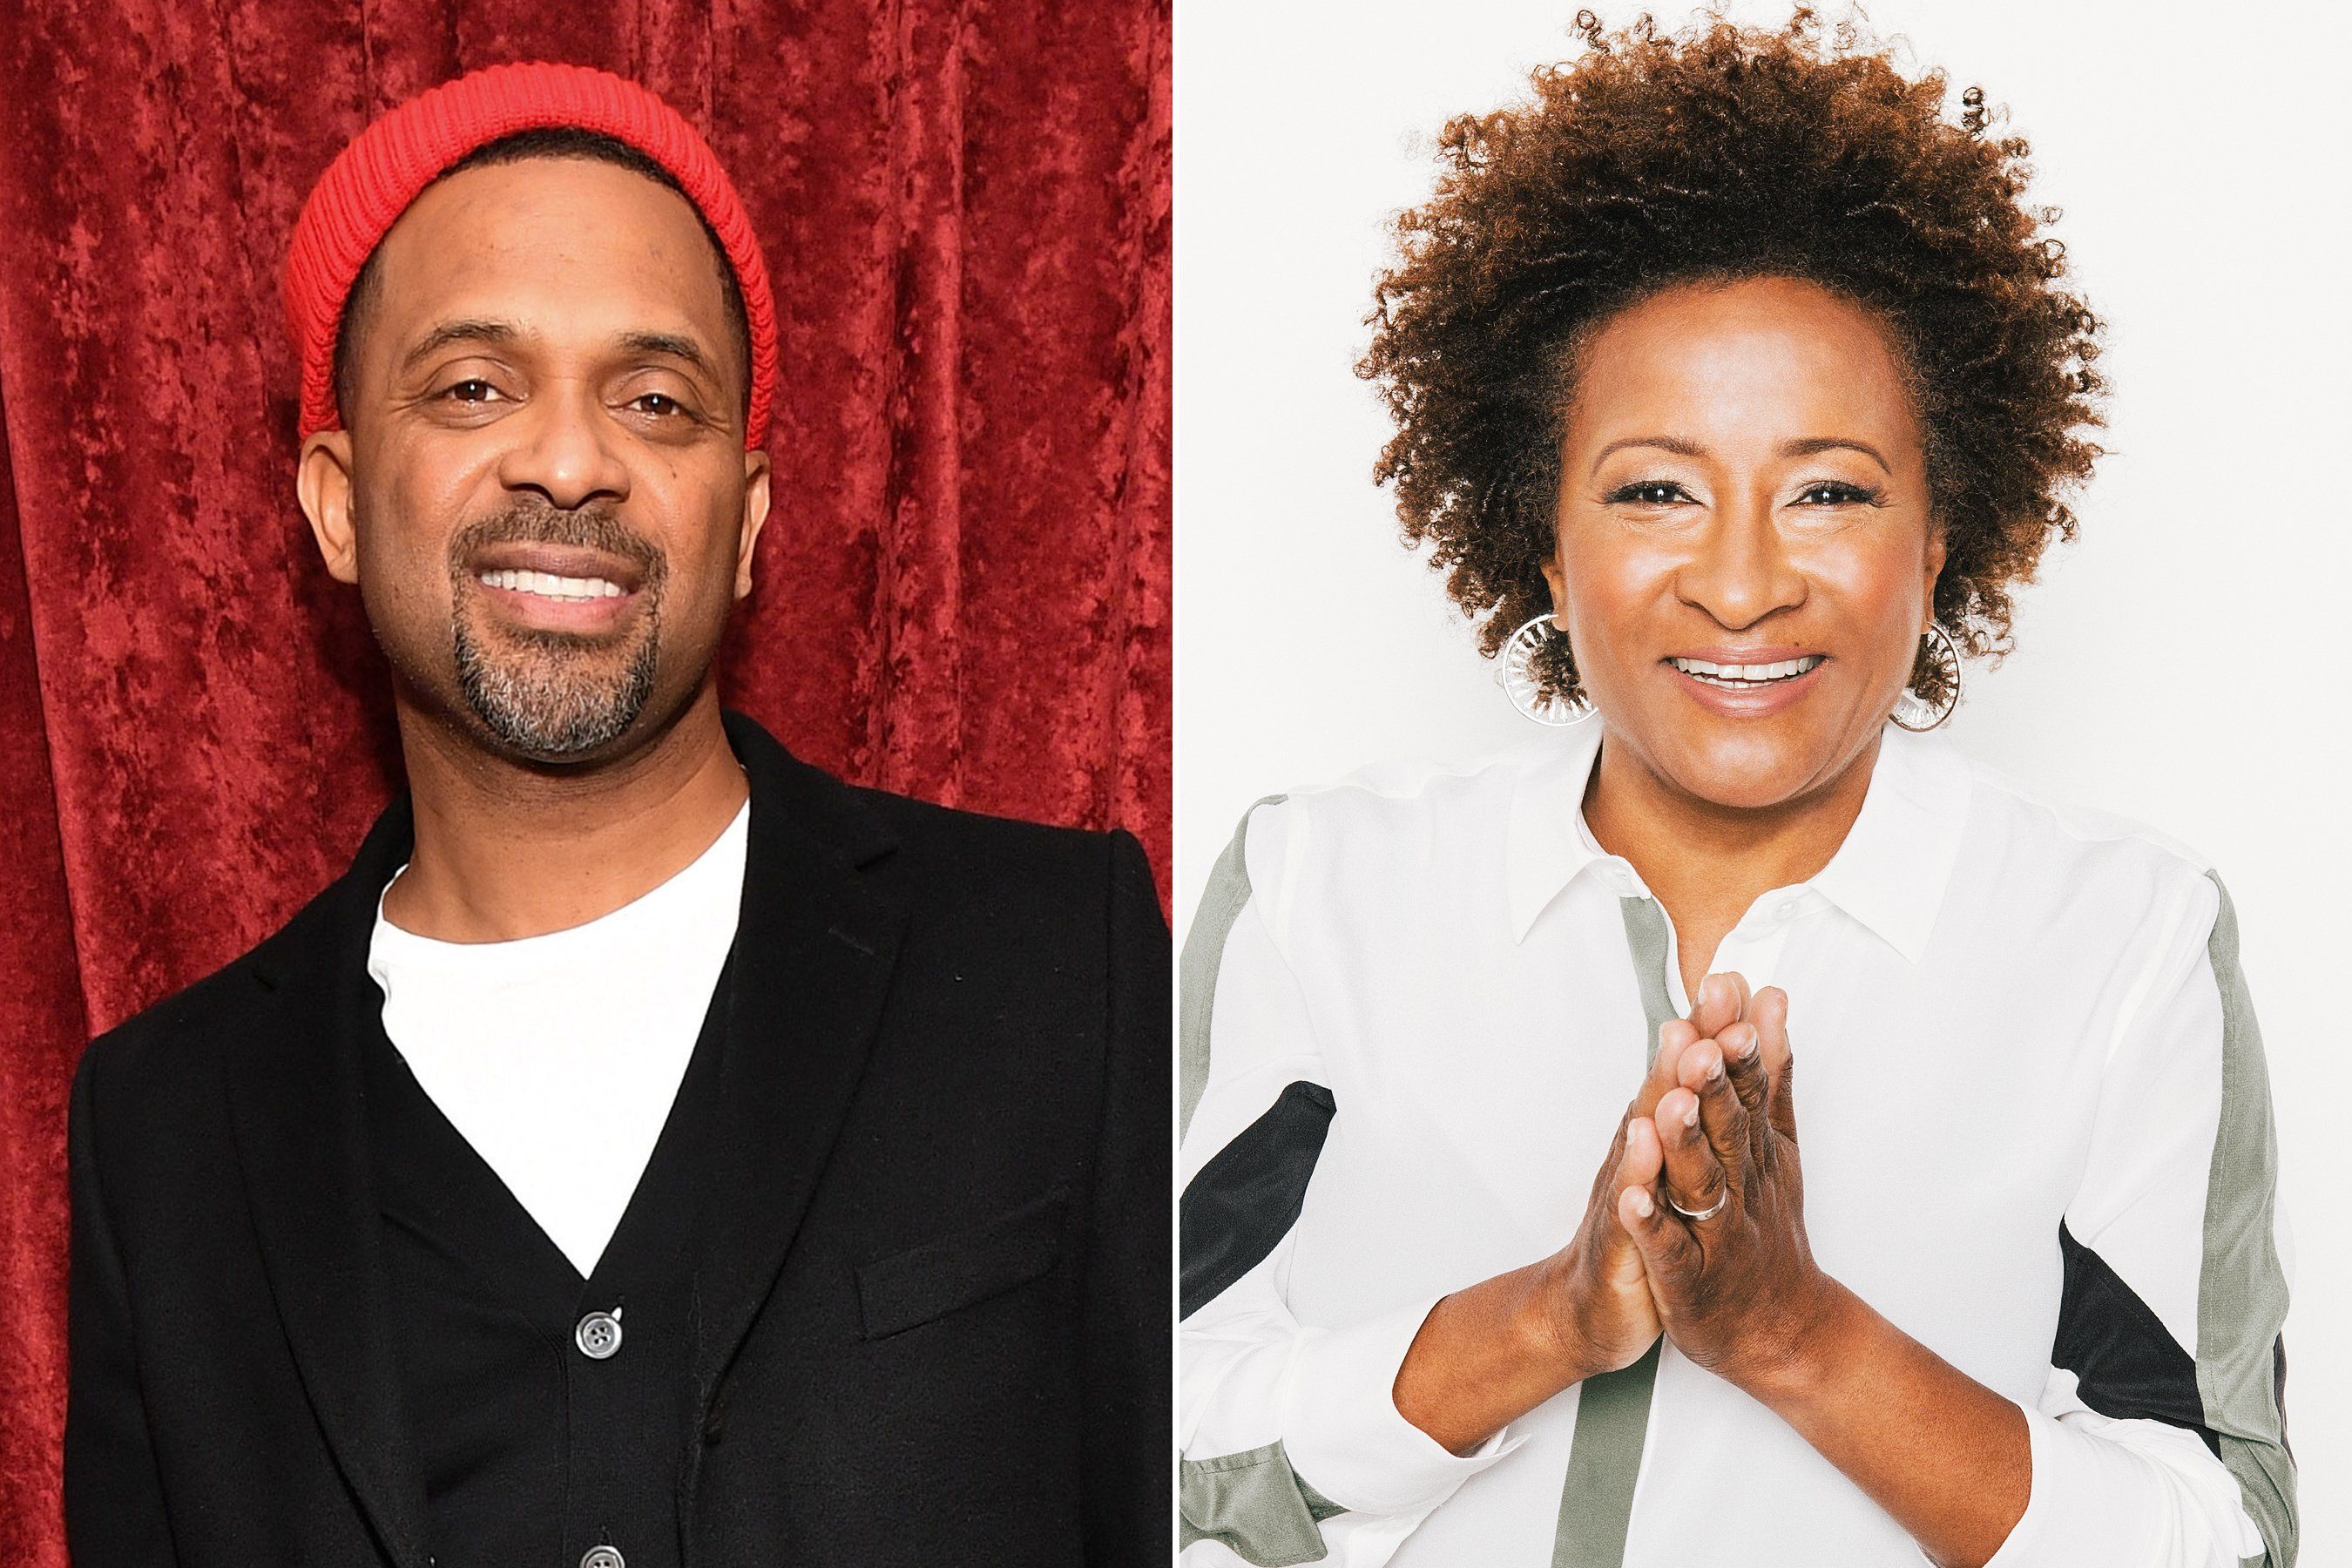 Wanda Sykes and Mike Epps to star in Netflix sitcom The Upshaws